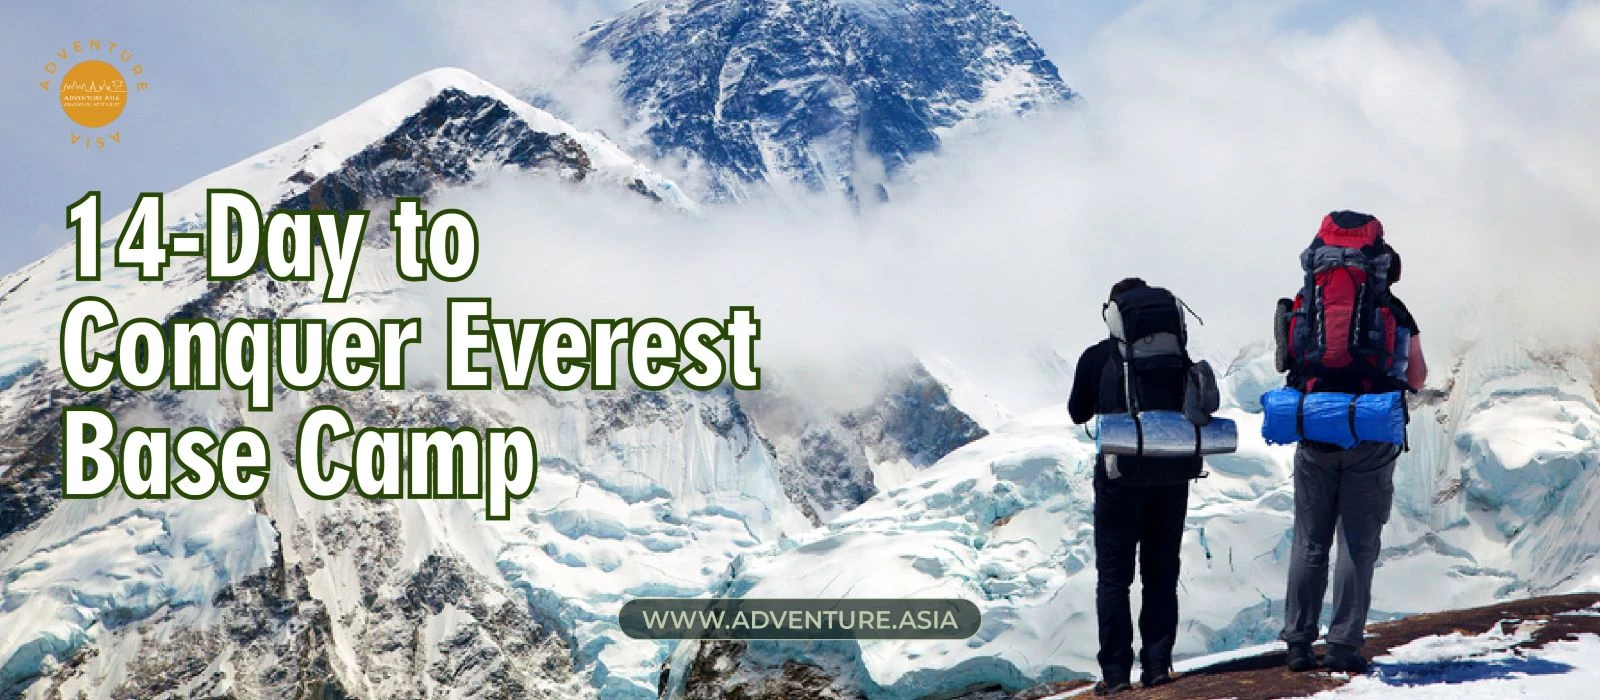 The Epic 14-Day Journey to Conquer Nepal Everest Base Camp